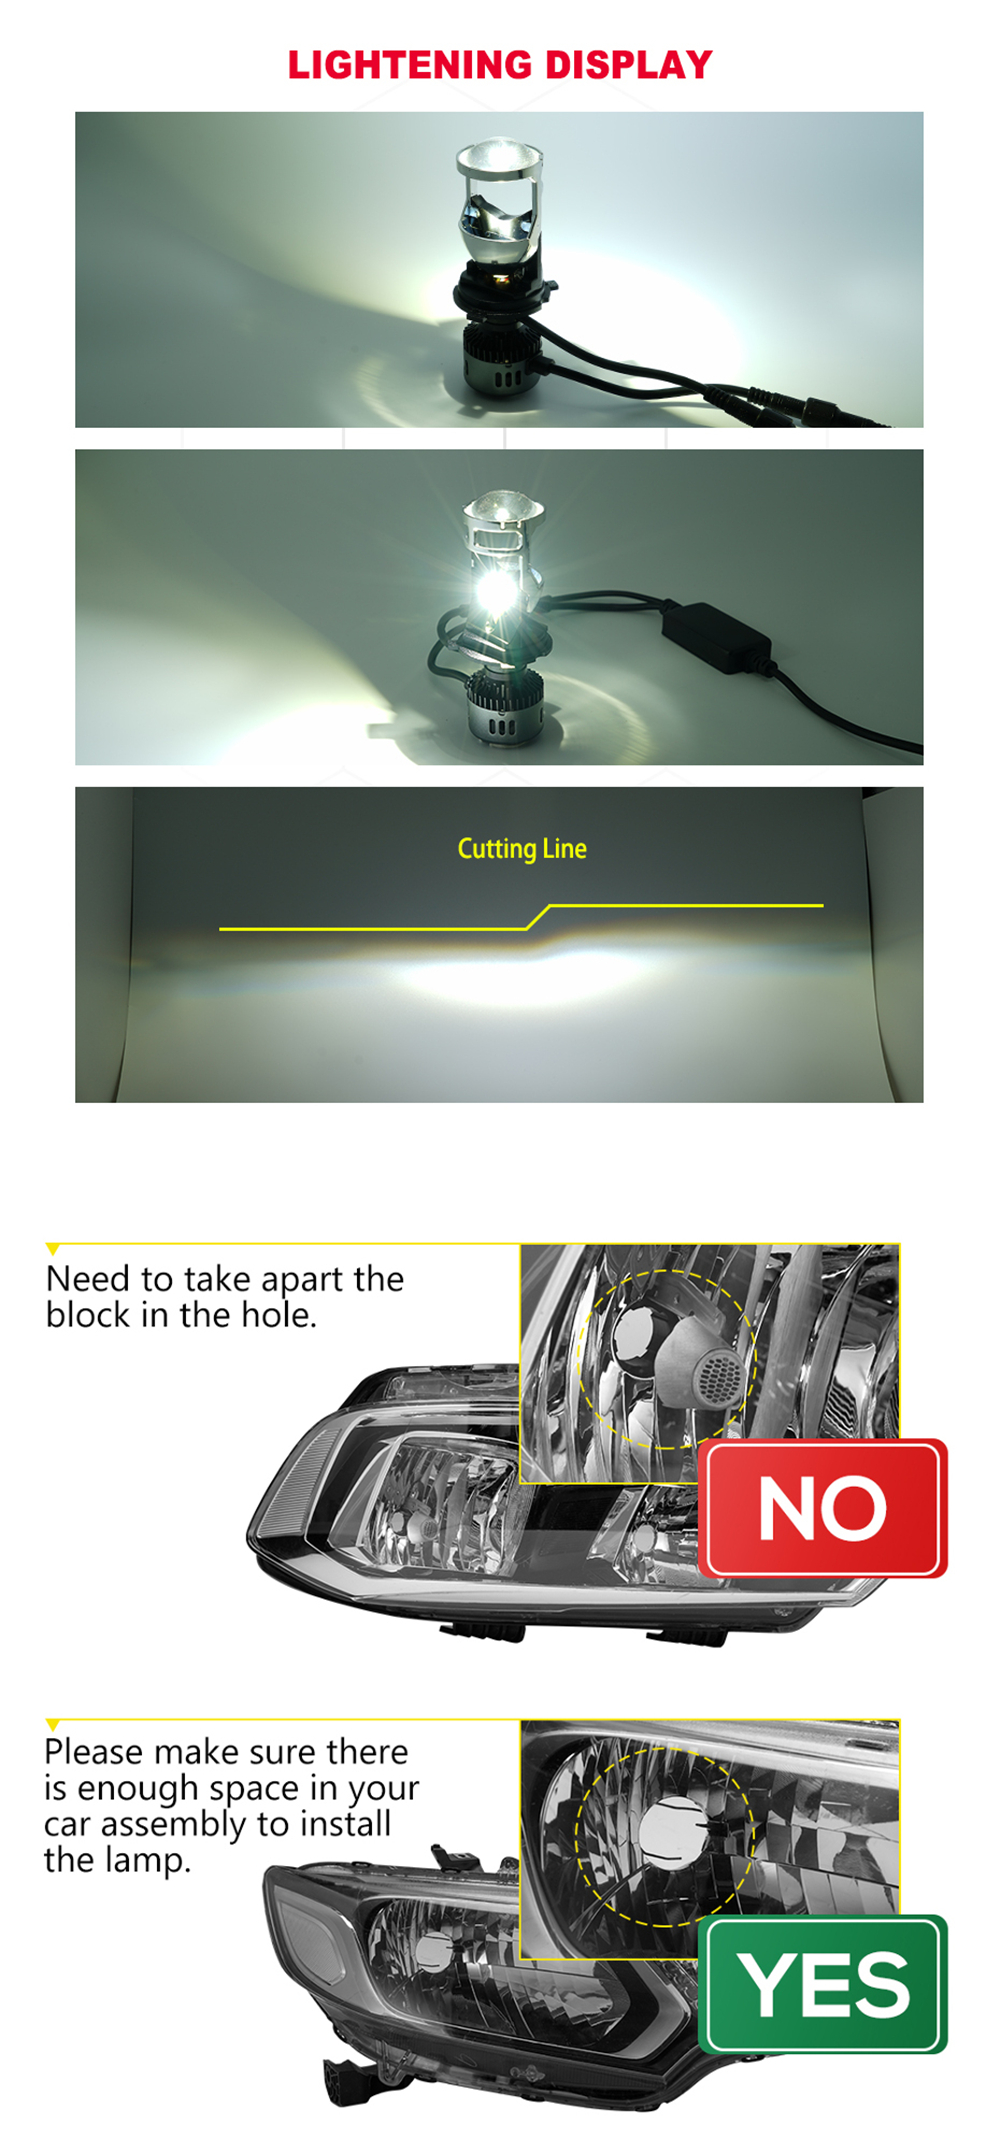 G9 H4 LED Headlights with Mini Projector Lens Hi/Lo Beam Bulb 60W 9600LM 6500K White for Car Motorcycle 21